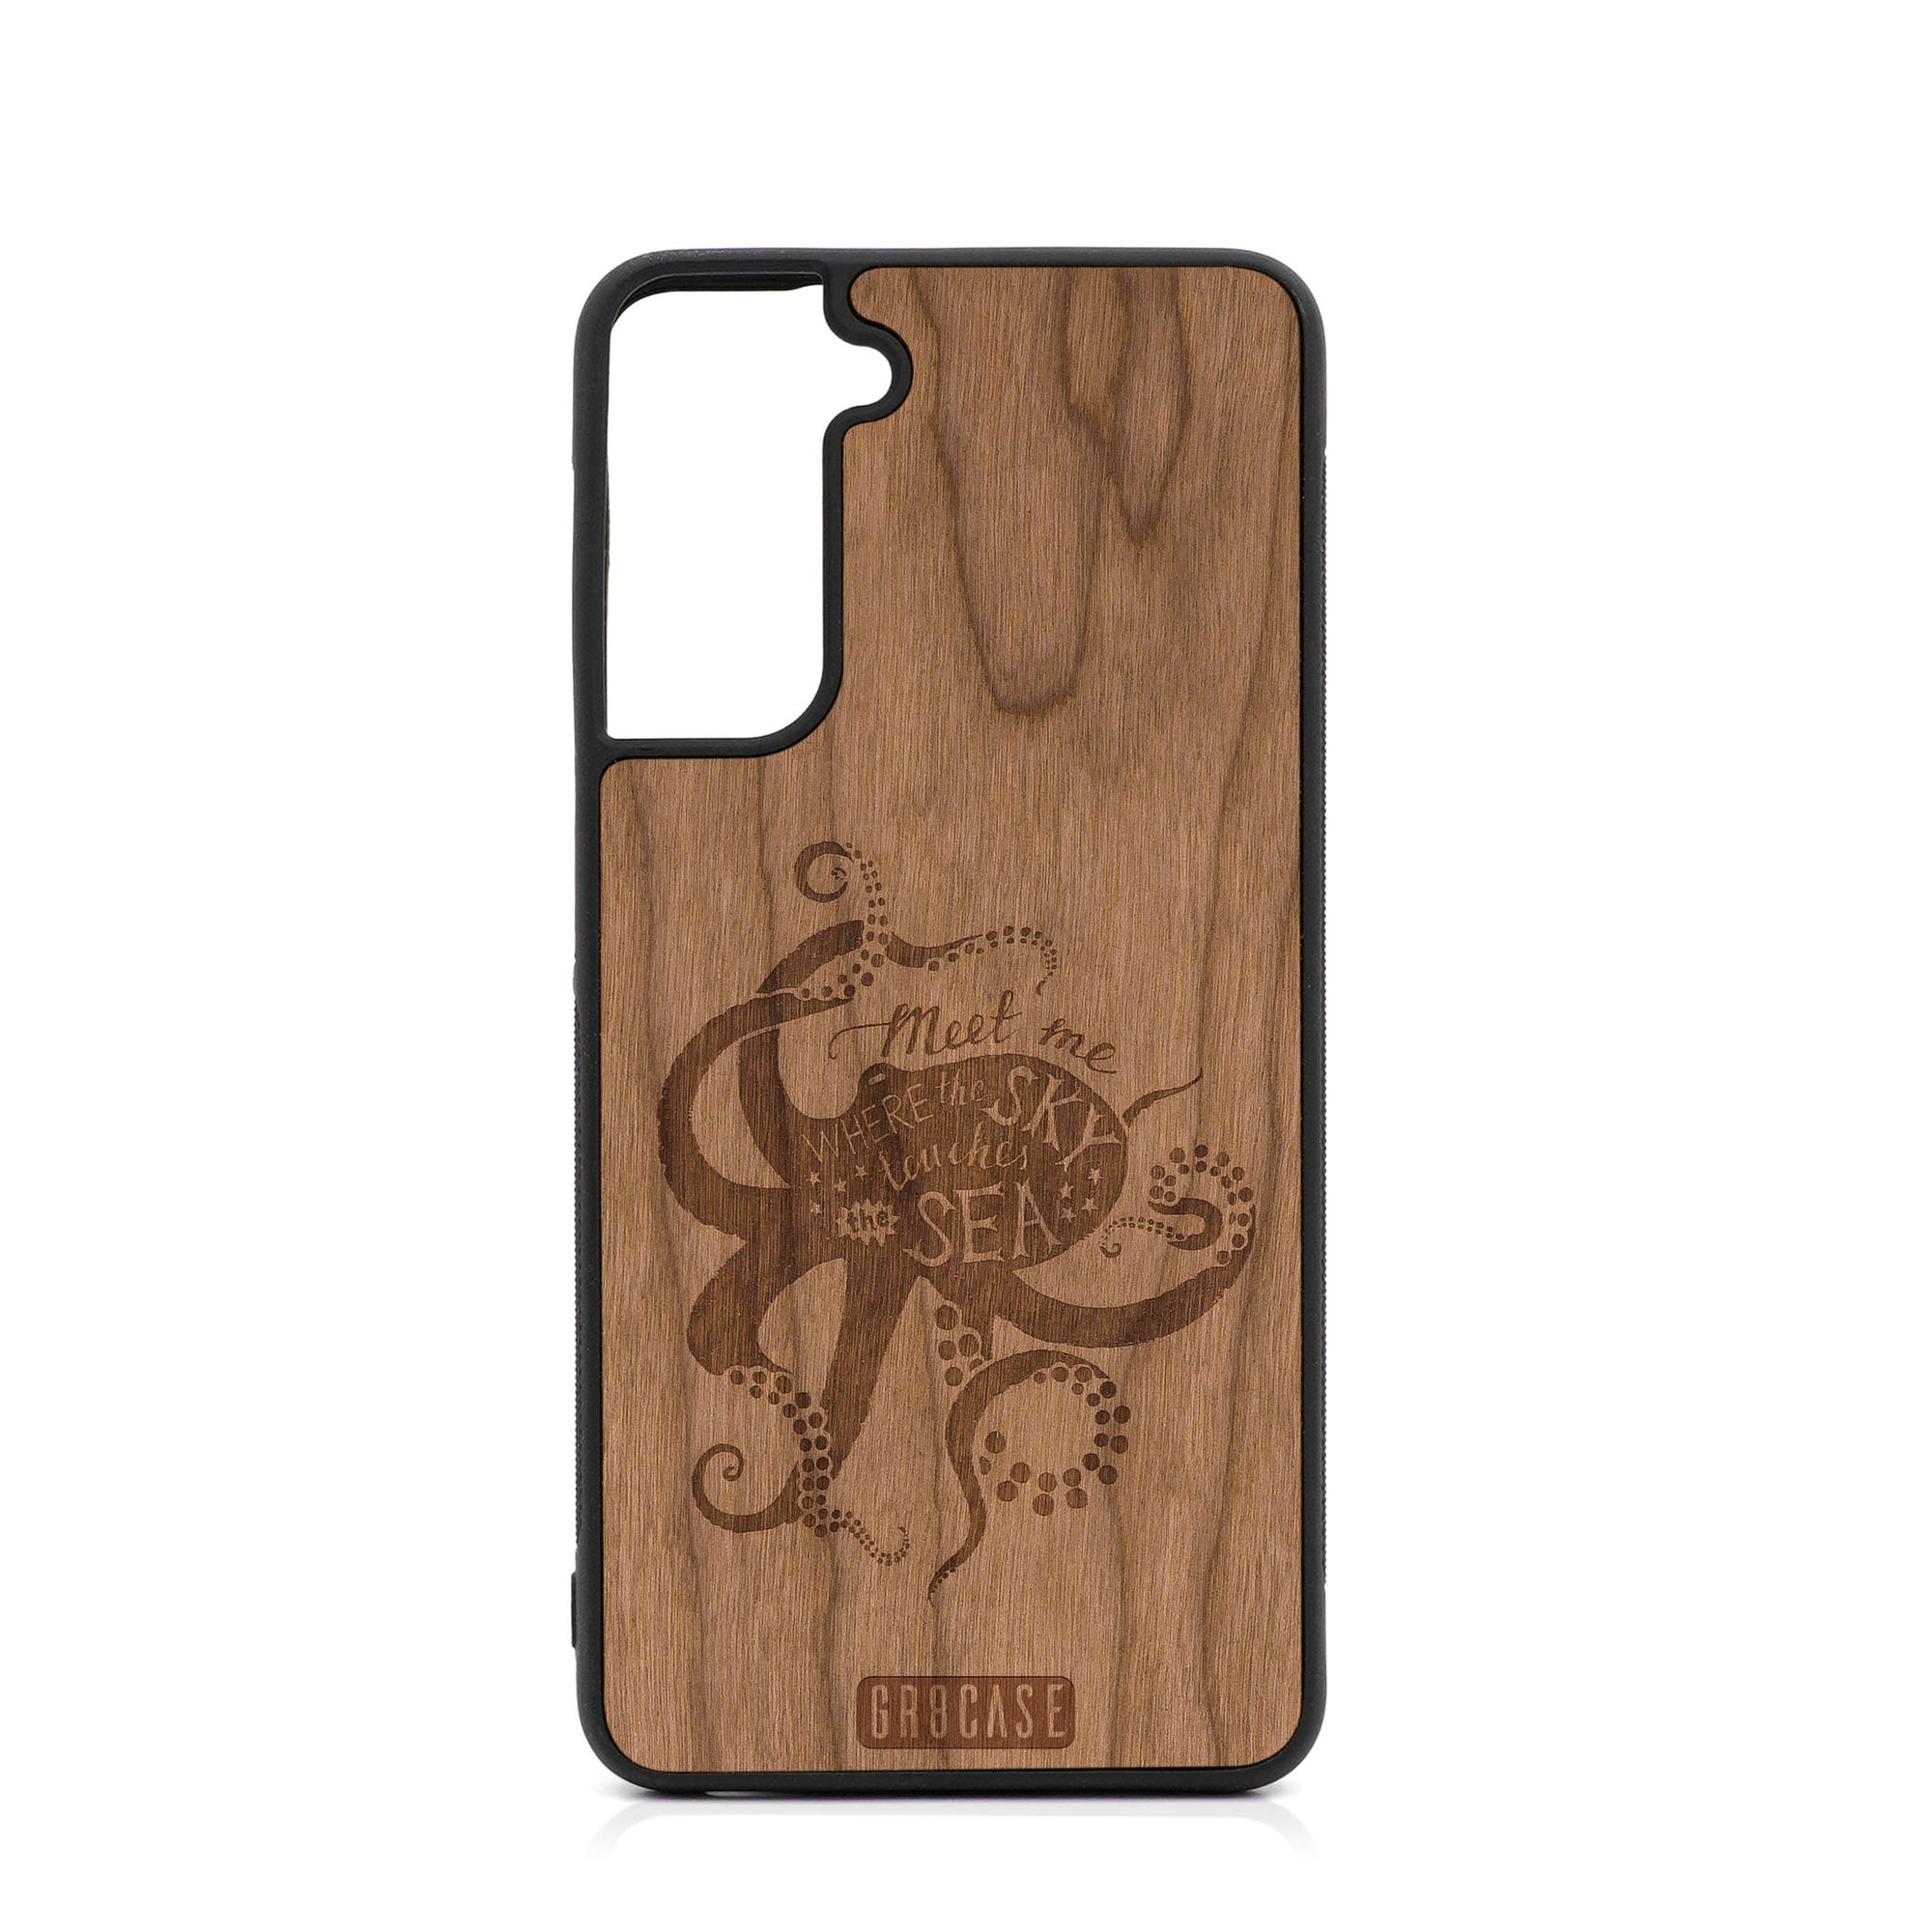 Meet Me Where The Sky Touches The Sea (Octopus) Design Wood Case For Samsung Galaxy S21 5G